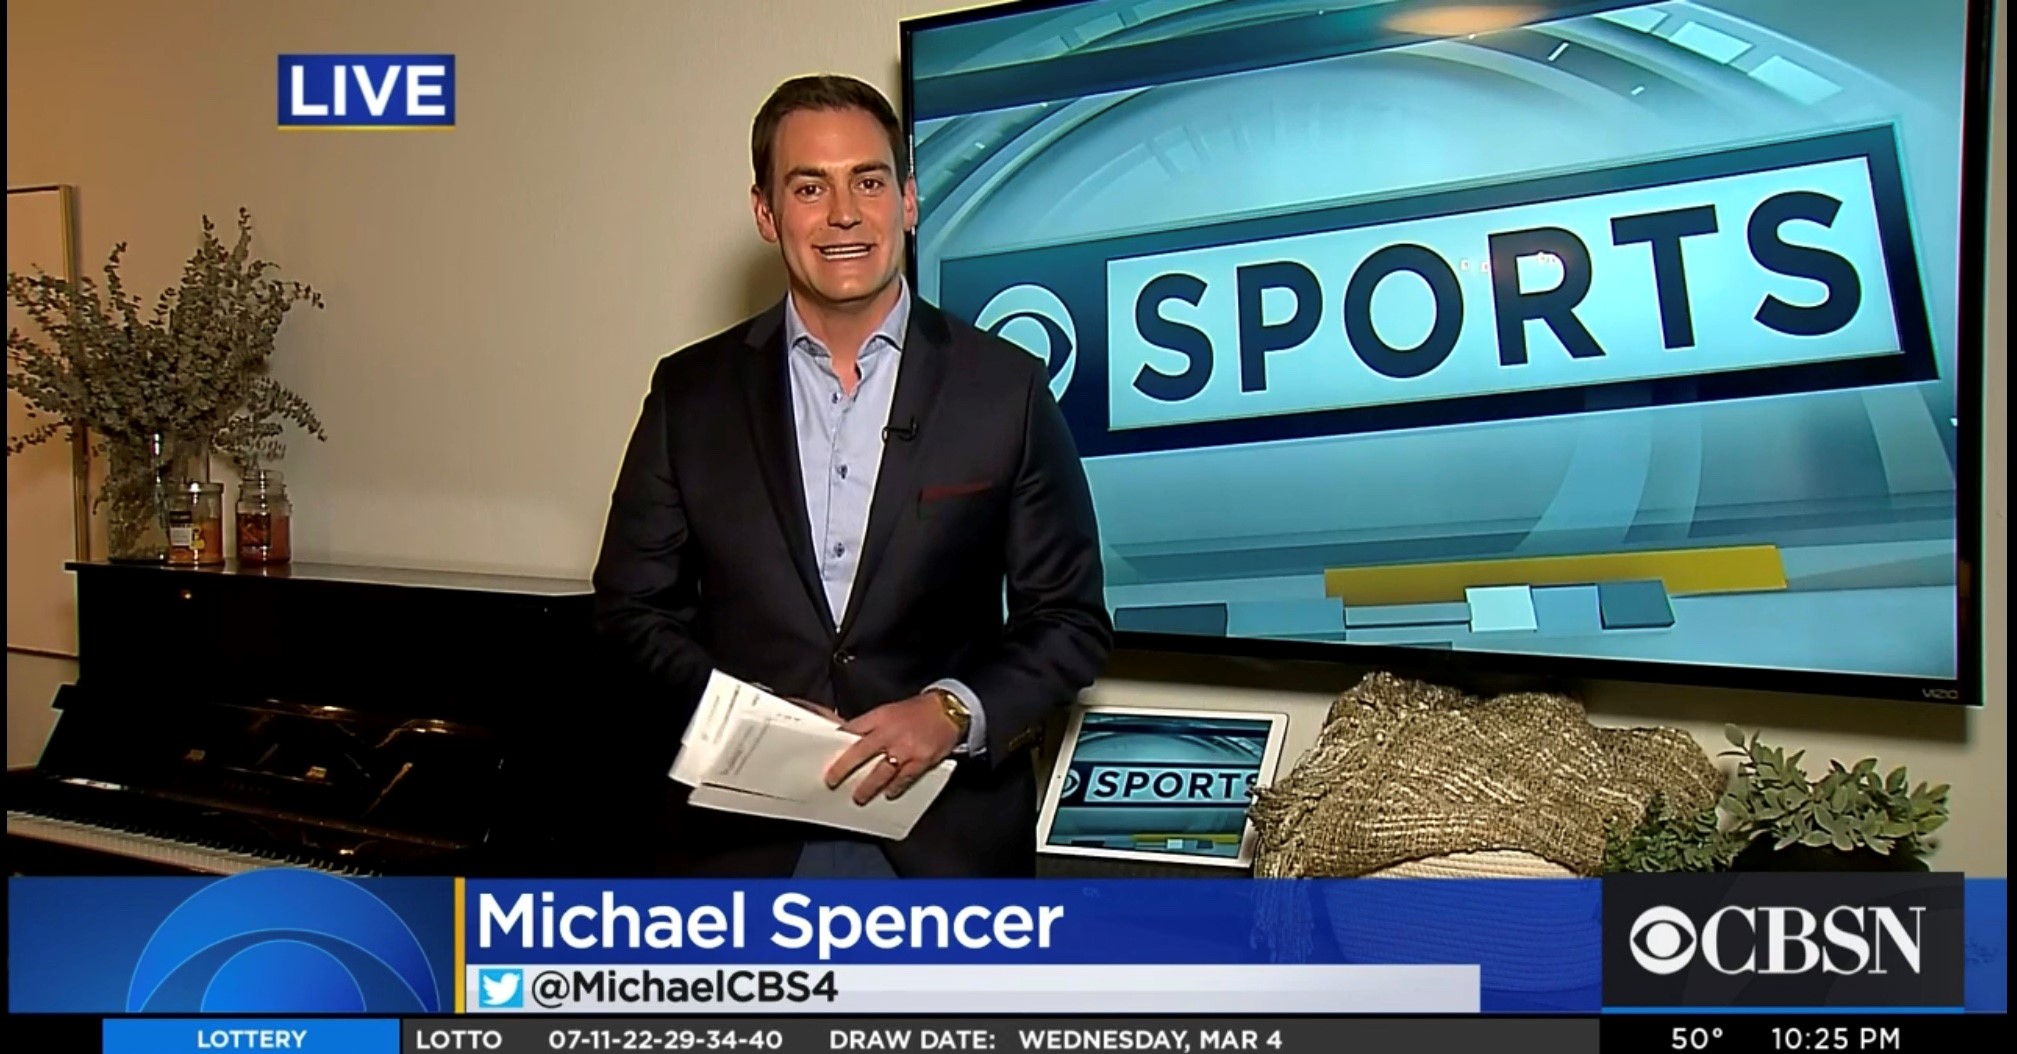 Michael Spencer reports on sports news during a CBS4 newscast.